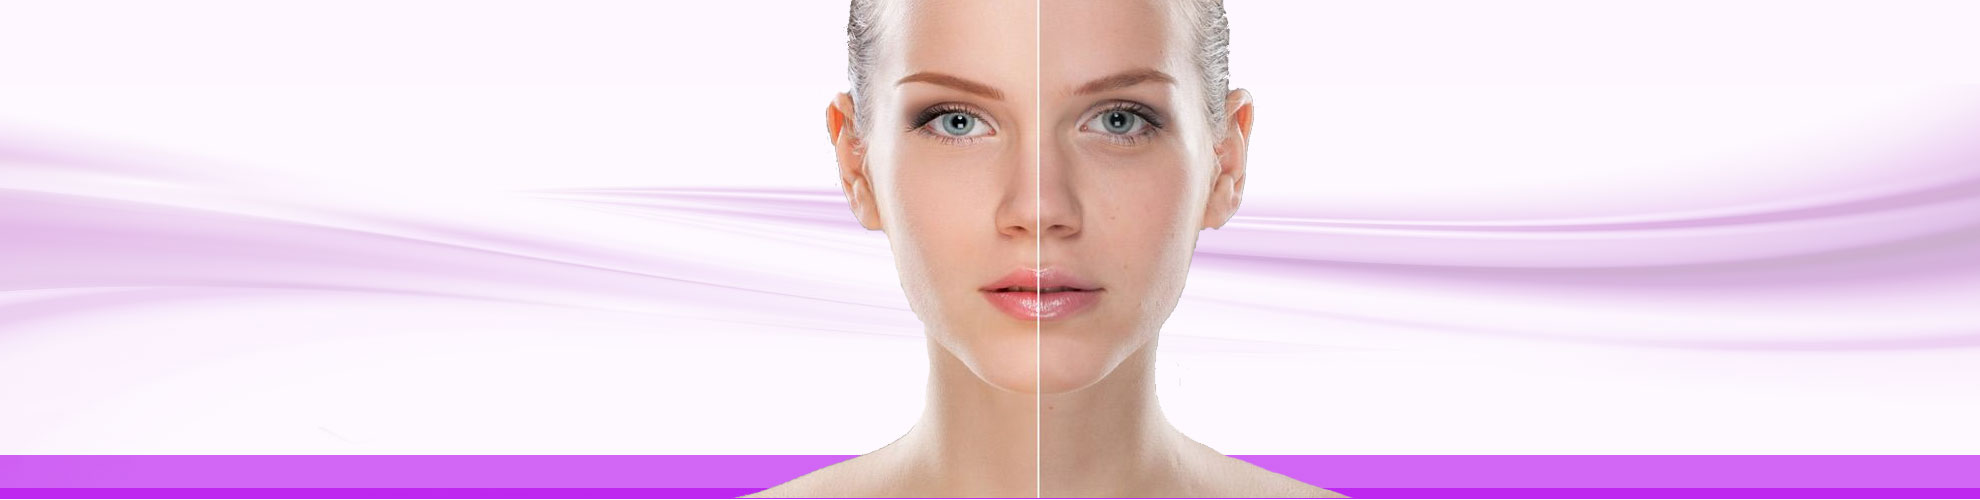 Botox injection clinic in toronto